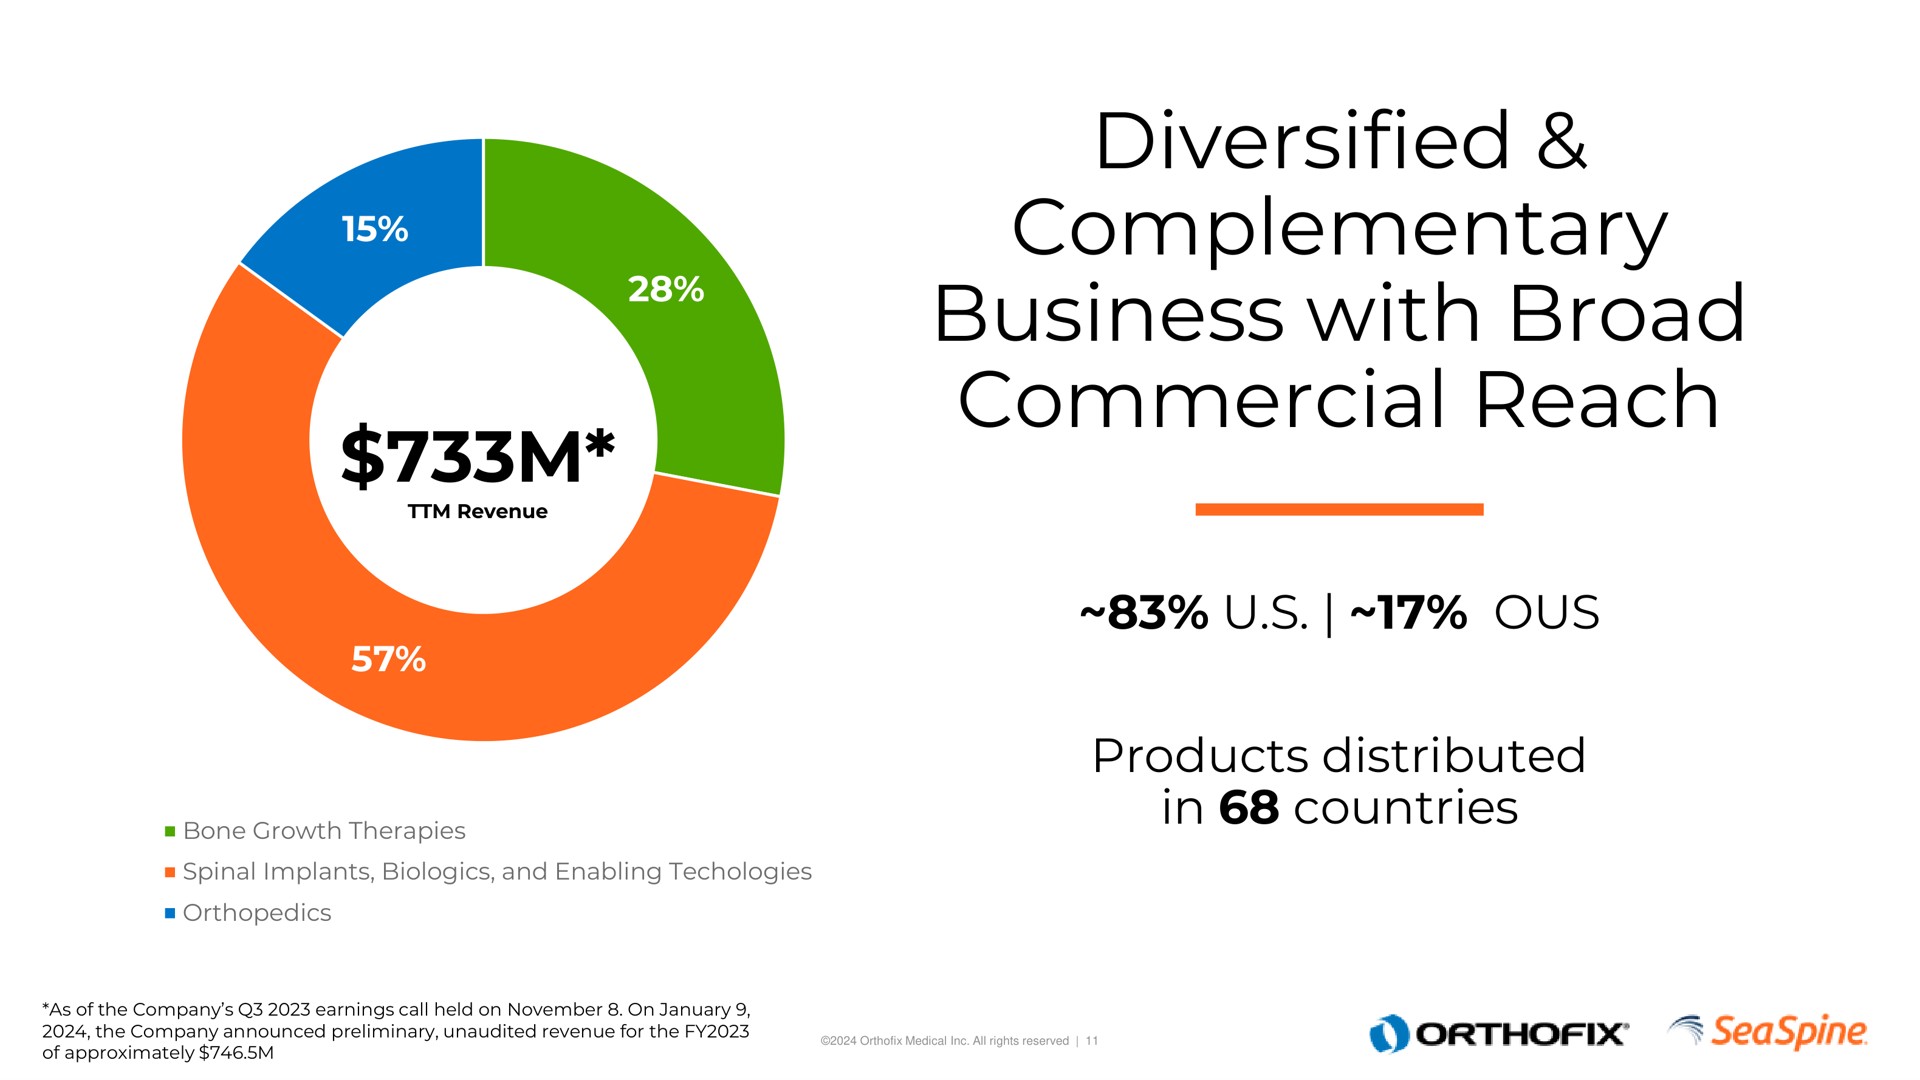 diversified complementary business with broad commercial reach products distributed in countries | Orthofix